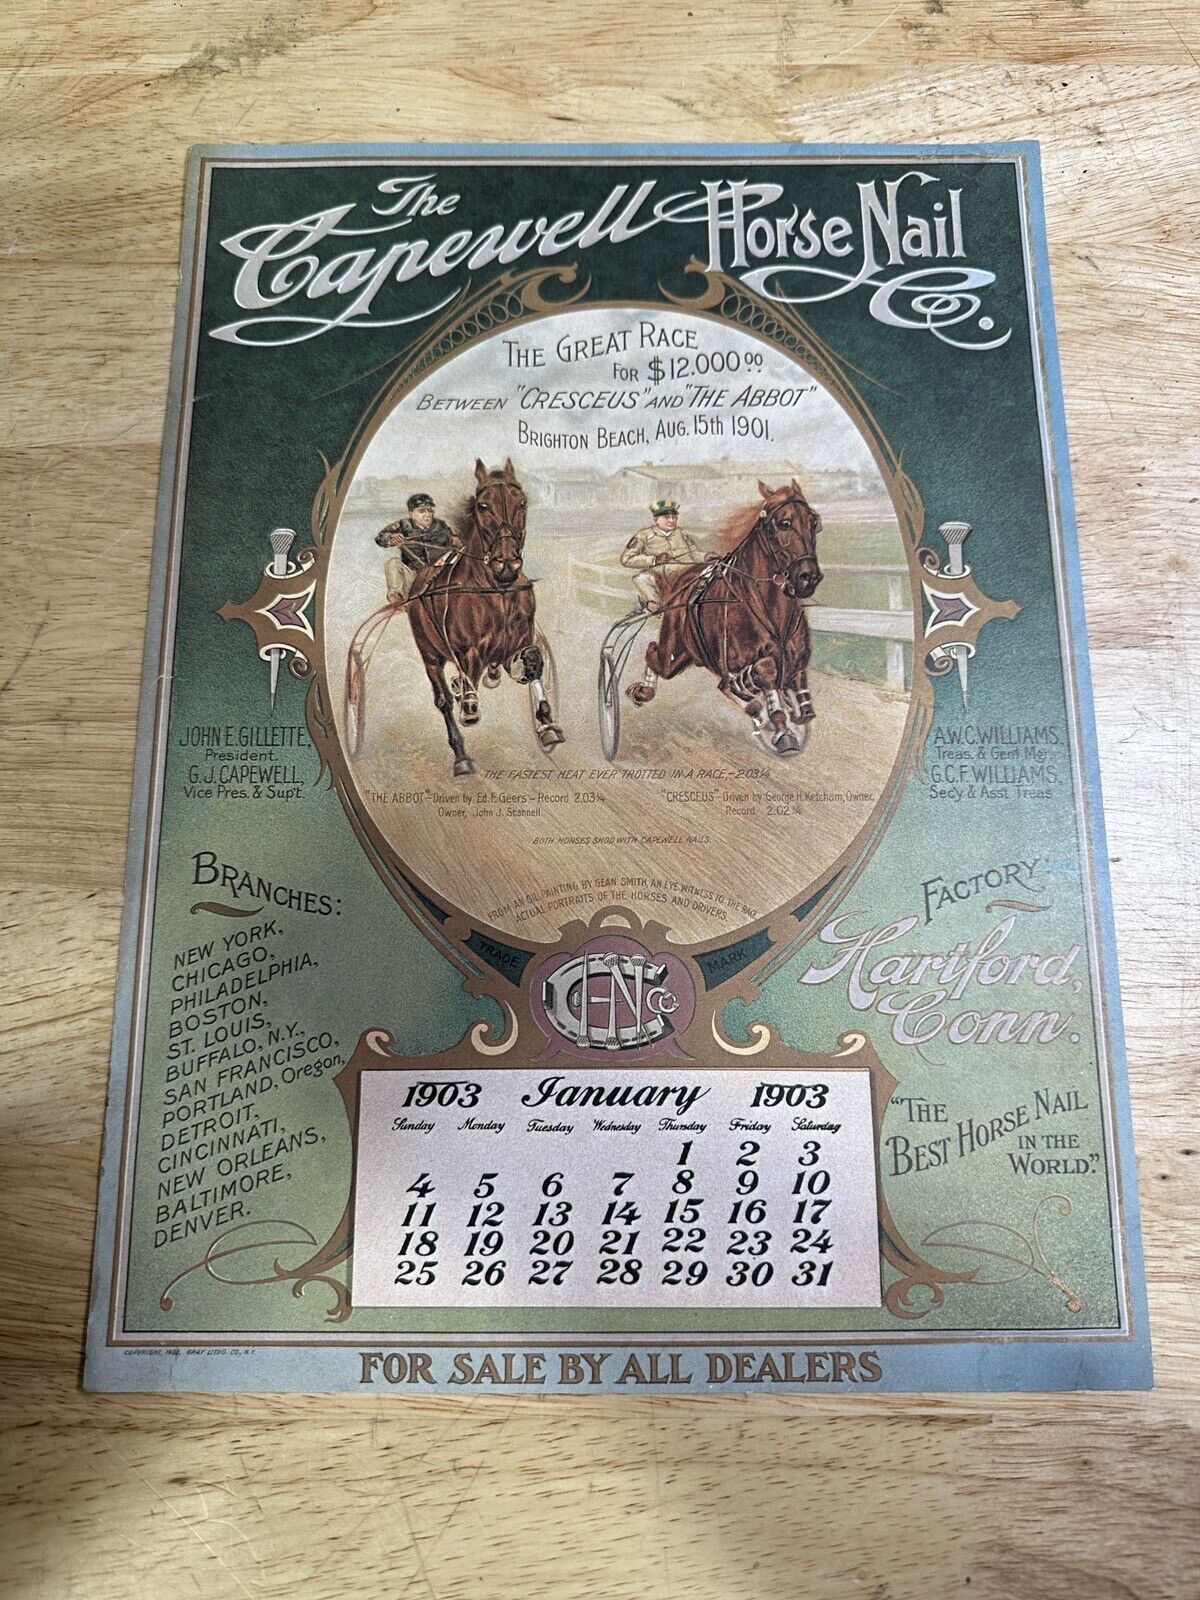 Antique January 1903 Capewell Horse Nail Co Advertising Calendar Poster